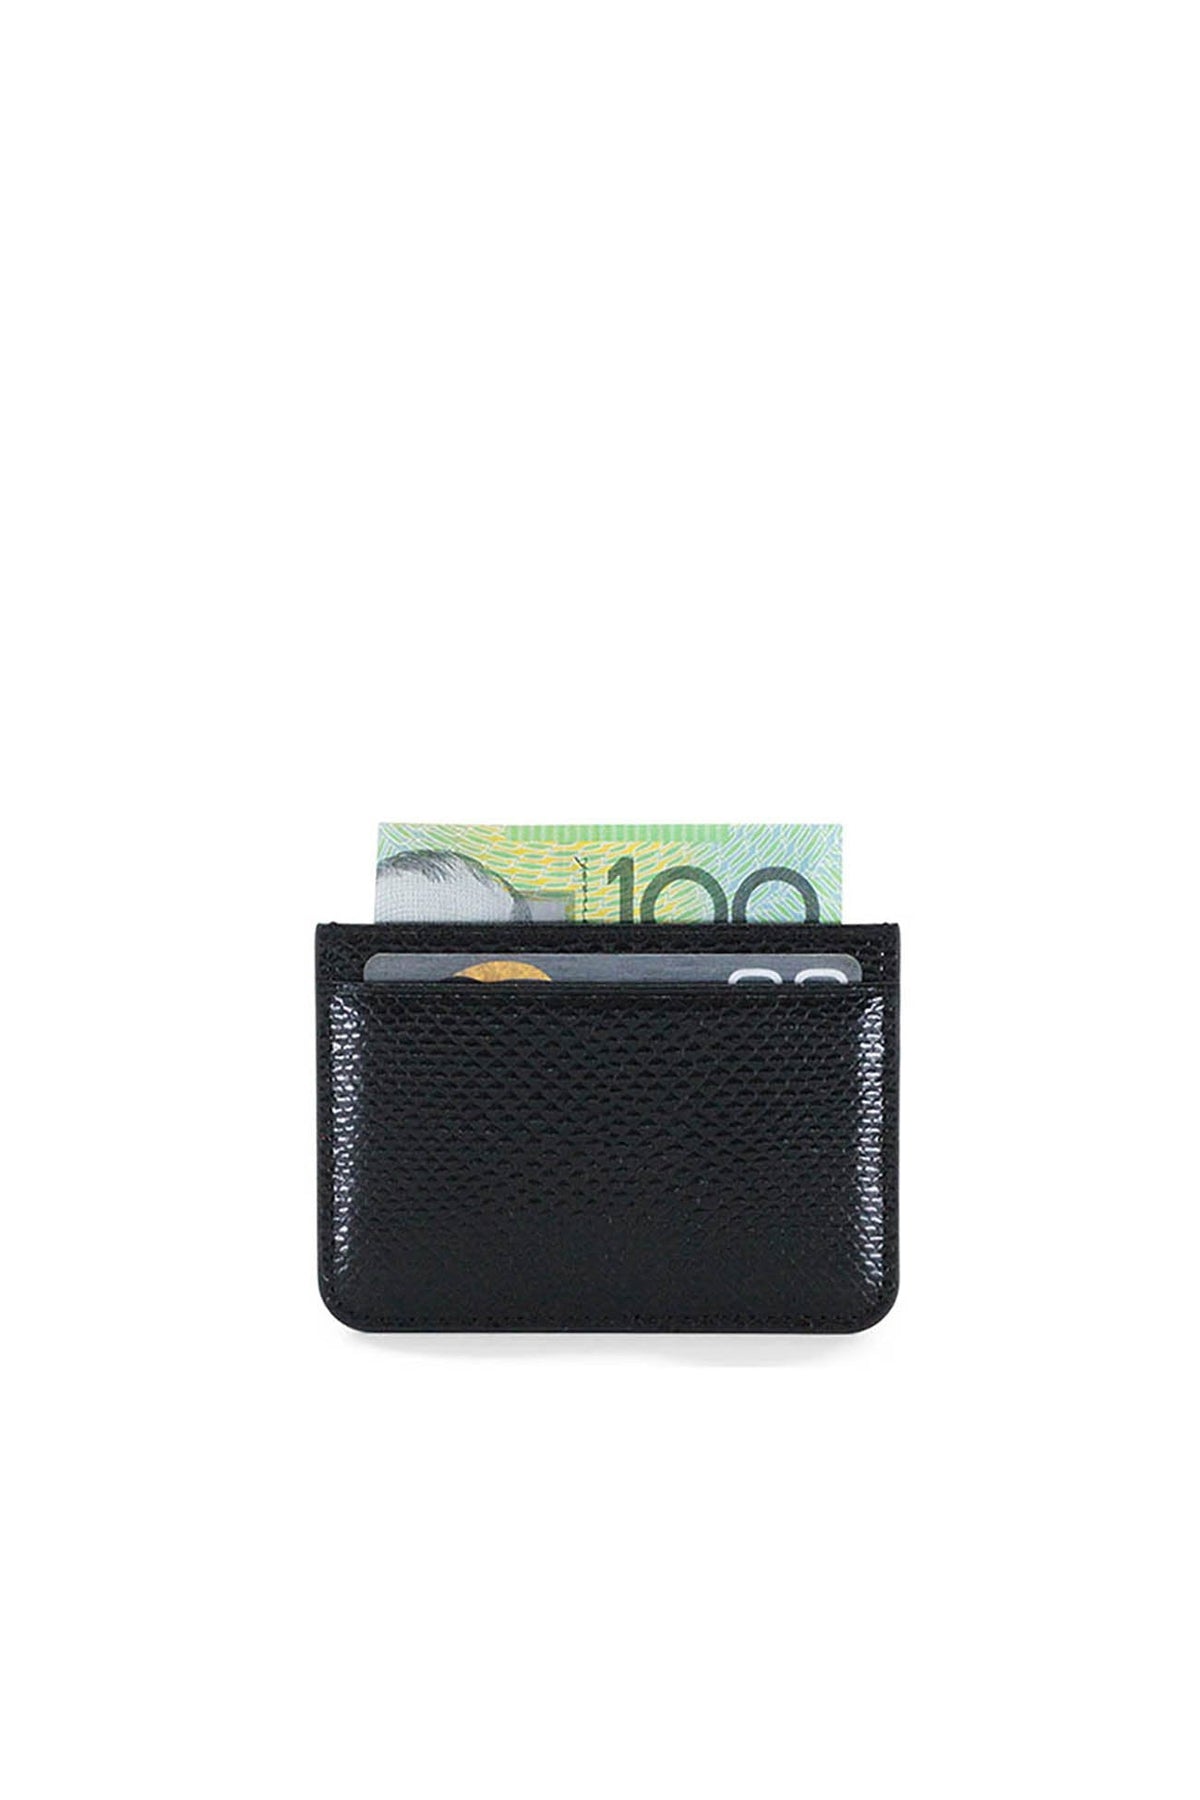 THE OPIUM CARD HOLDER BLACK SILVER